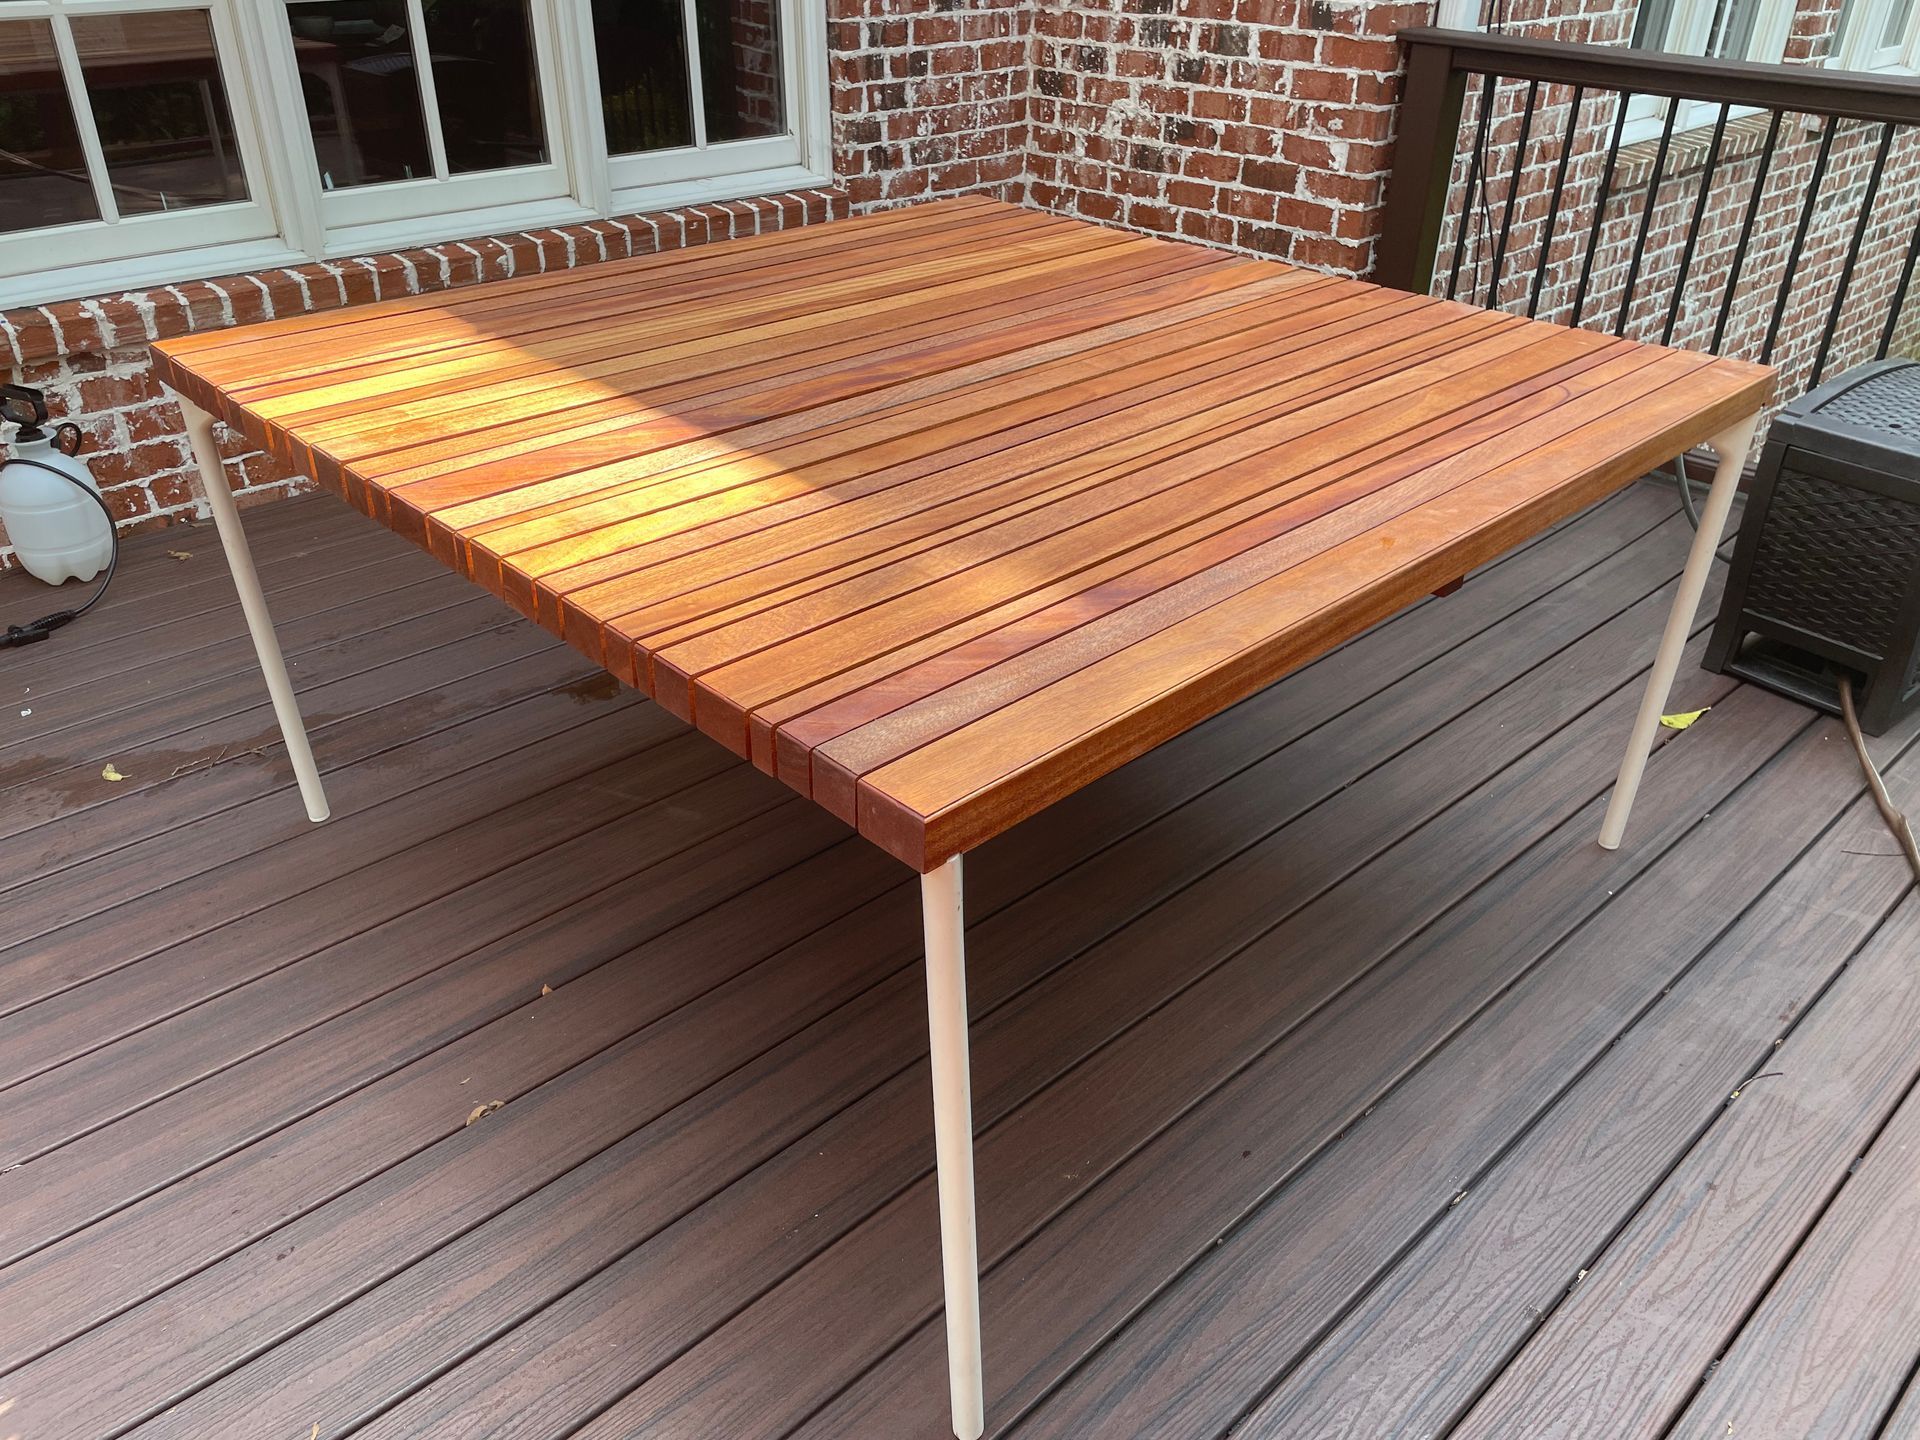 A wooden table is sitting on a wooden deck in front of a brick building.